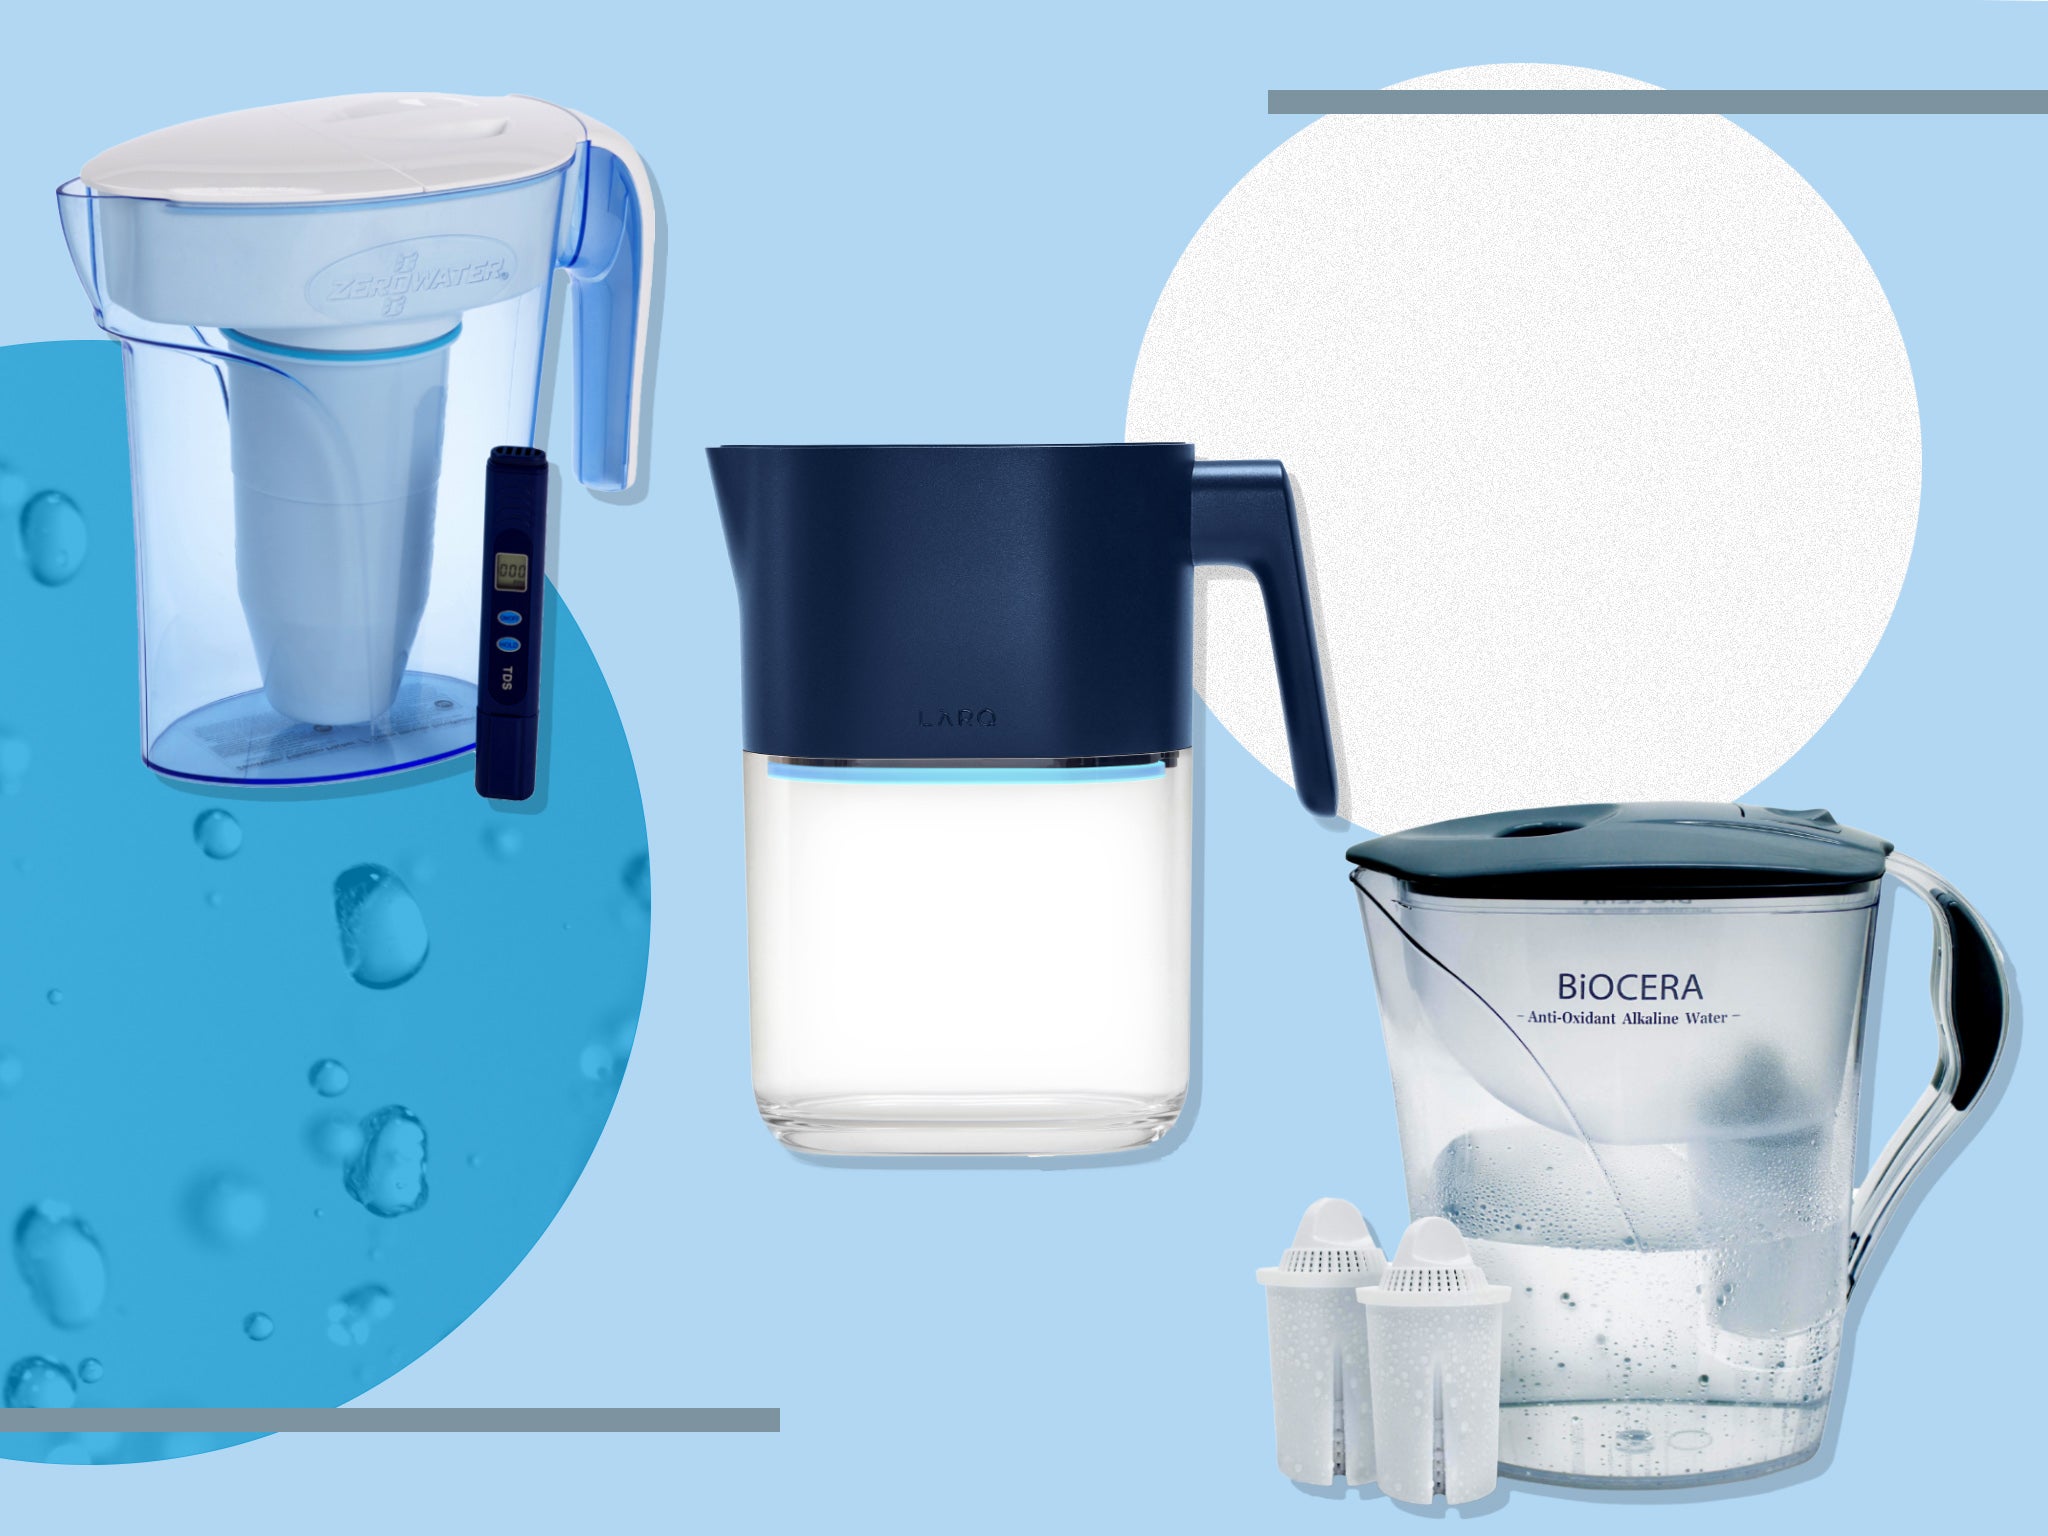 Geyser Water Filter vs TAPP Faucet Water Filter - which filter is